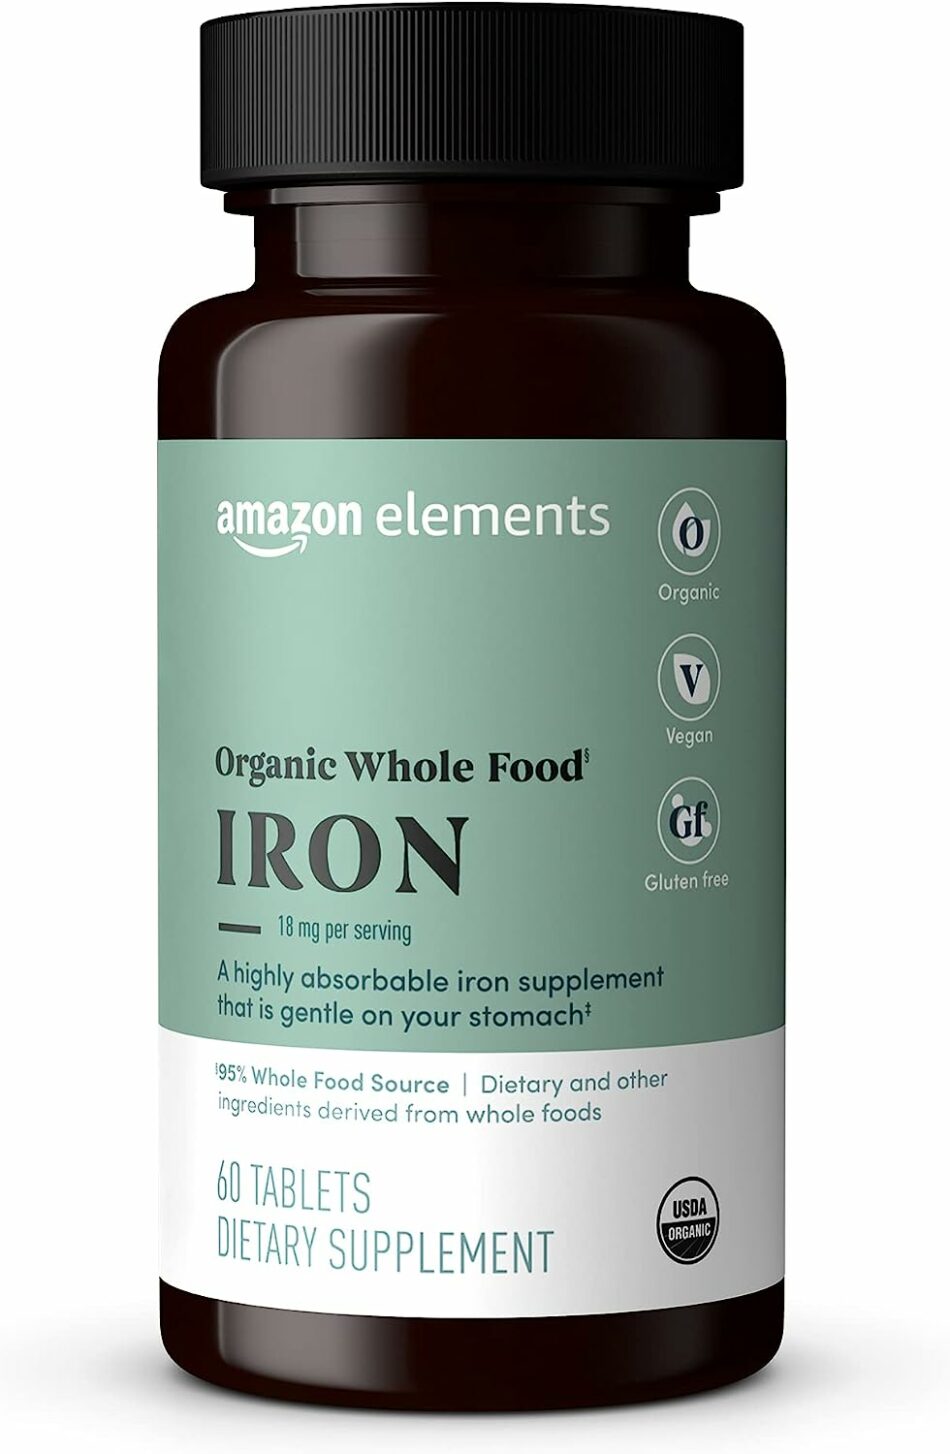 “Organic Whole Food Iron: Highly Absorbable Dietary Supplement | Non-GMO, Vegan & Gluten-Free | Alexa Voice Shopping Enabled”